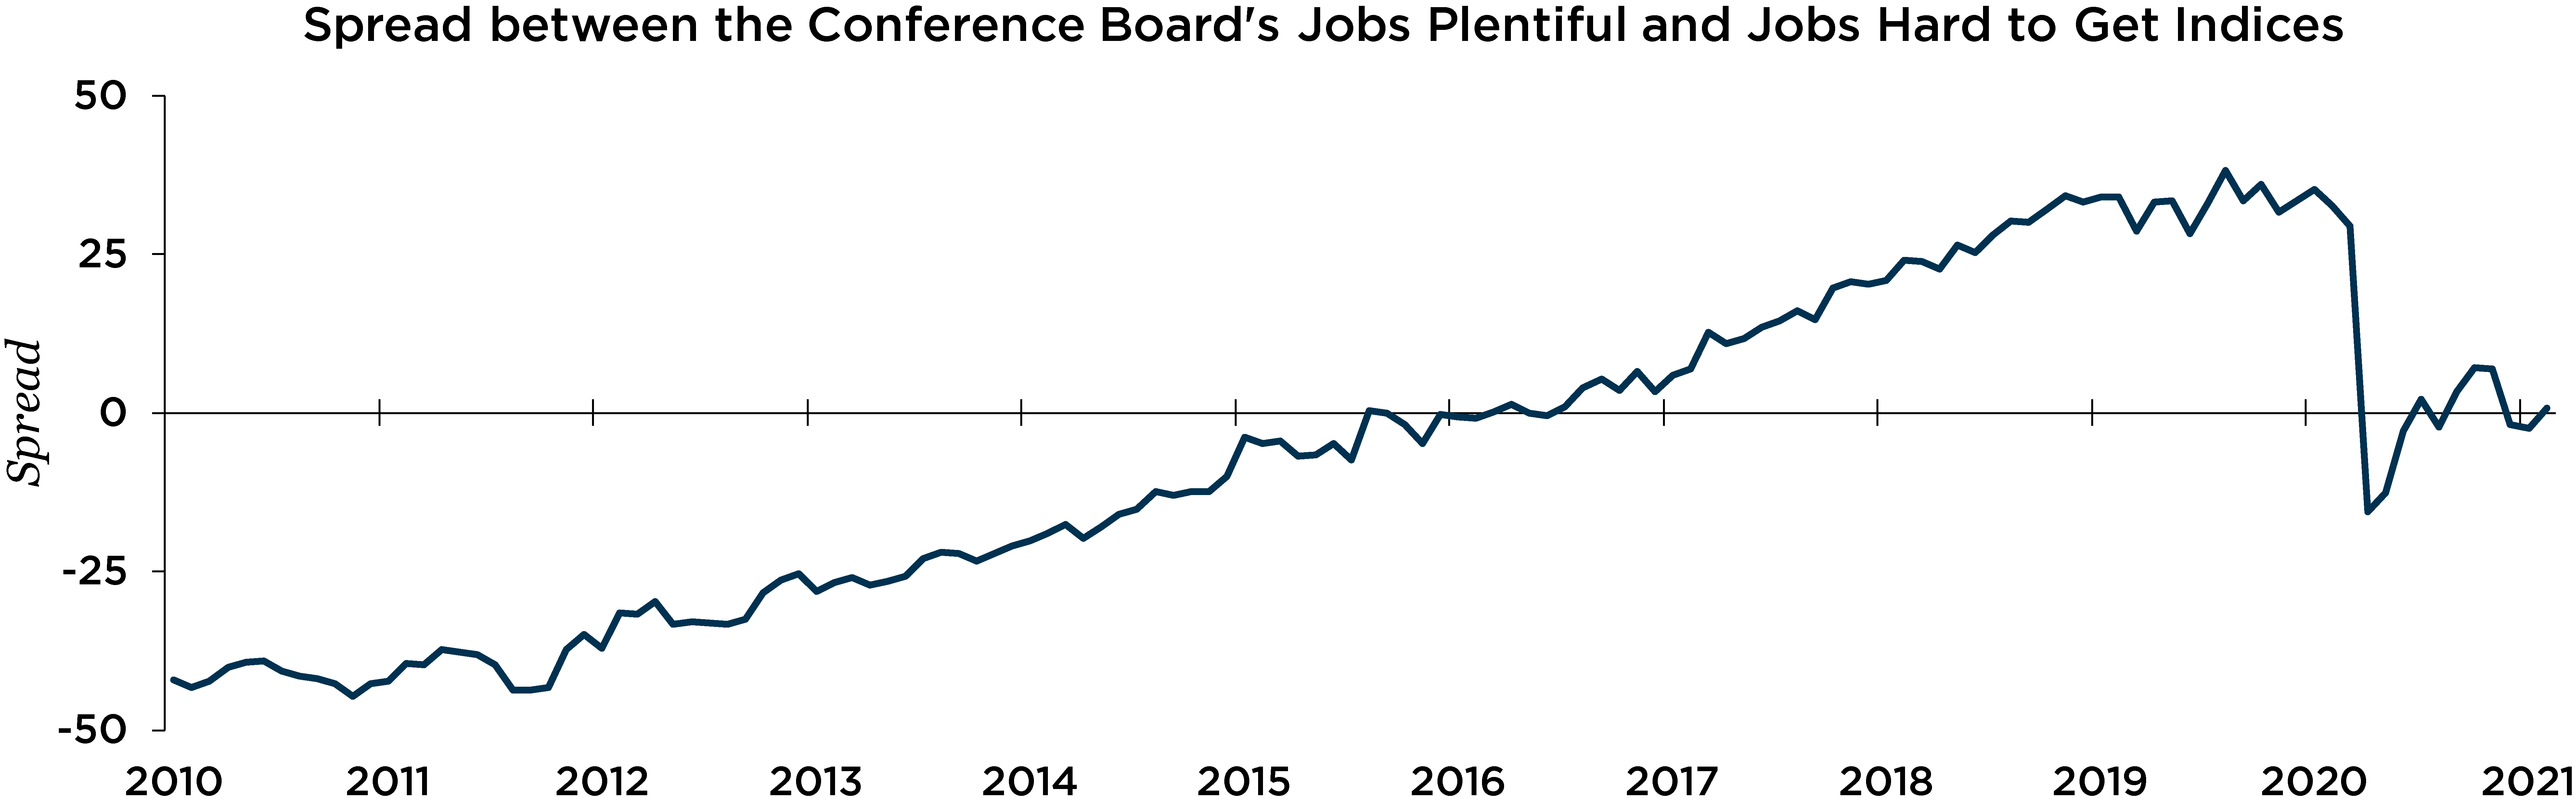 Graph depicting spread between the conference board's jobs plentiful and jobs hard to get indices